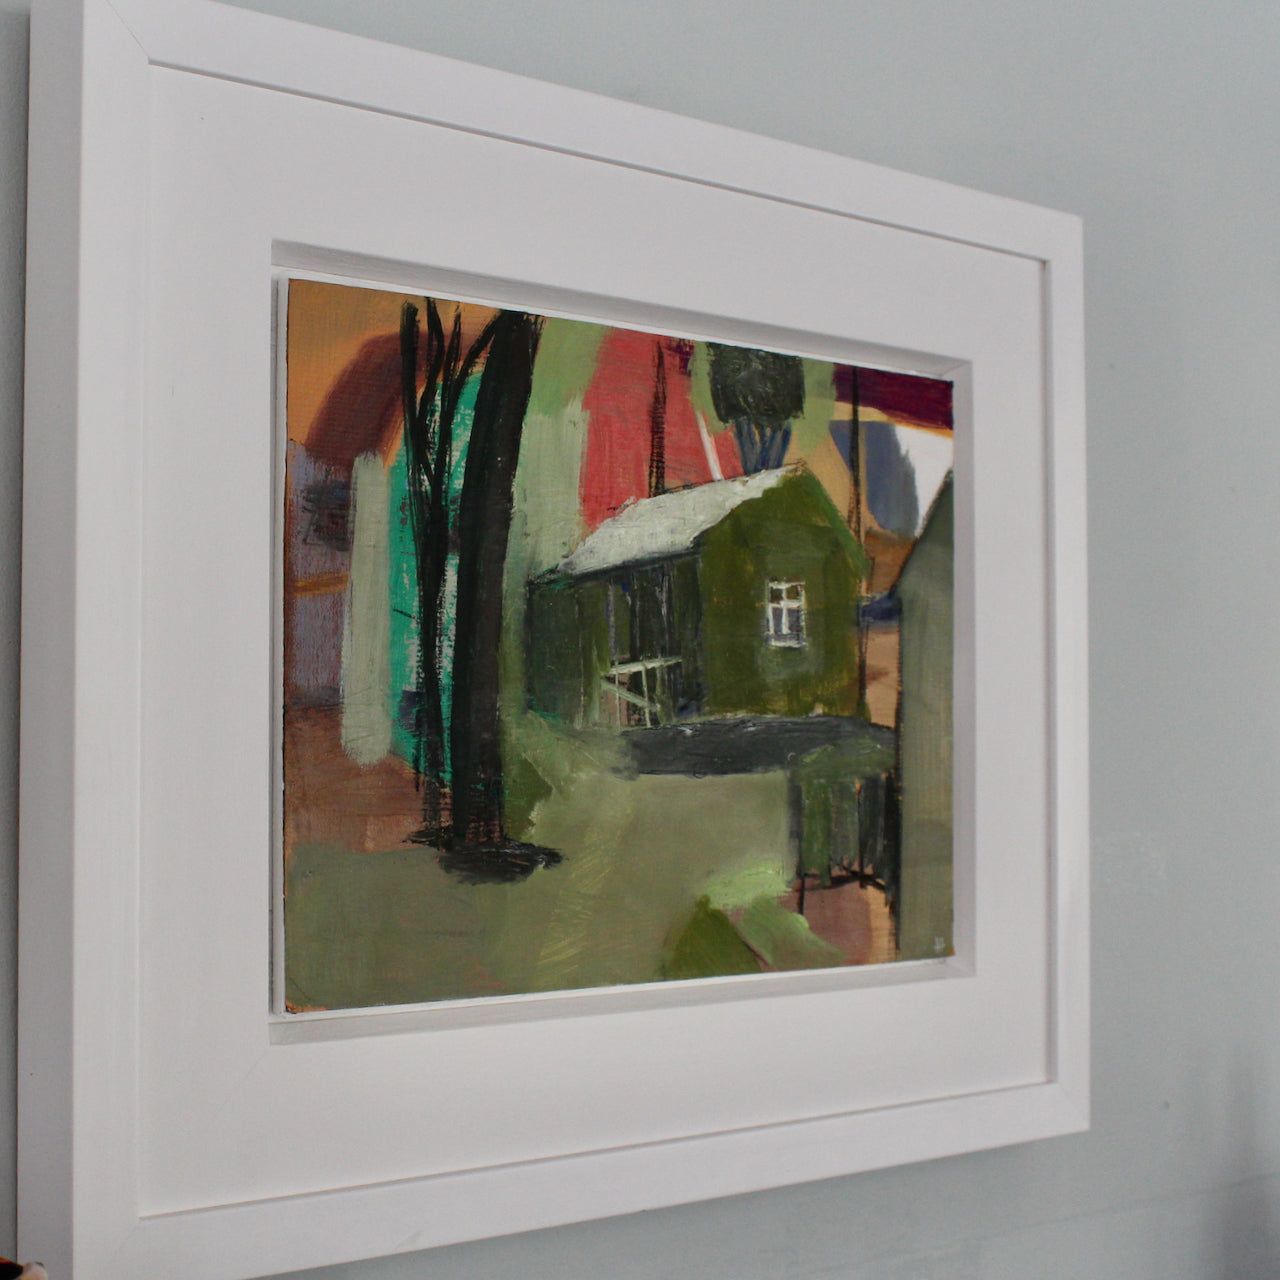 a framed oil painting by Cornwall artist Heath Hearn of a green shed with a white roof in the clearing of some trees.